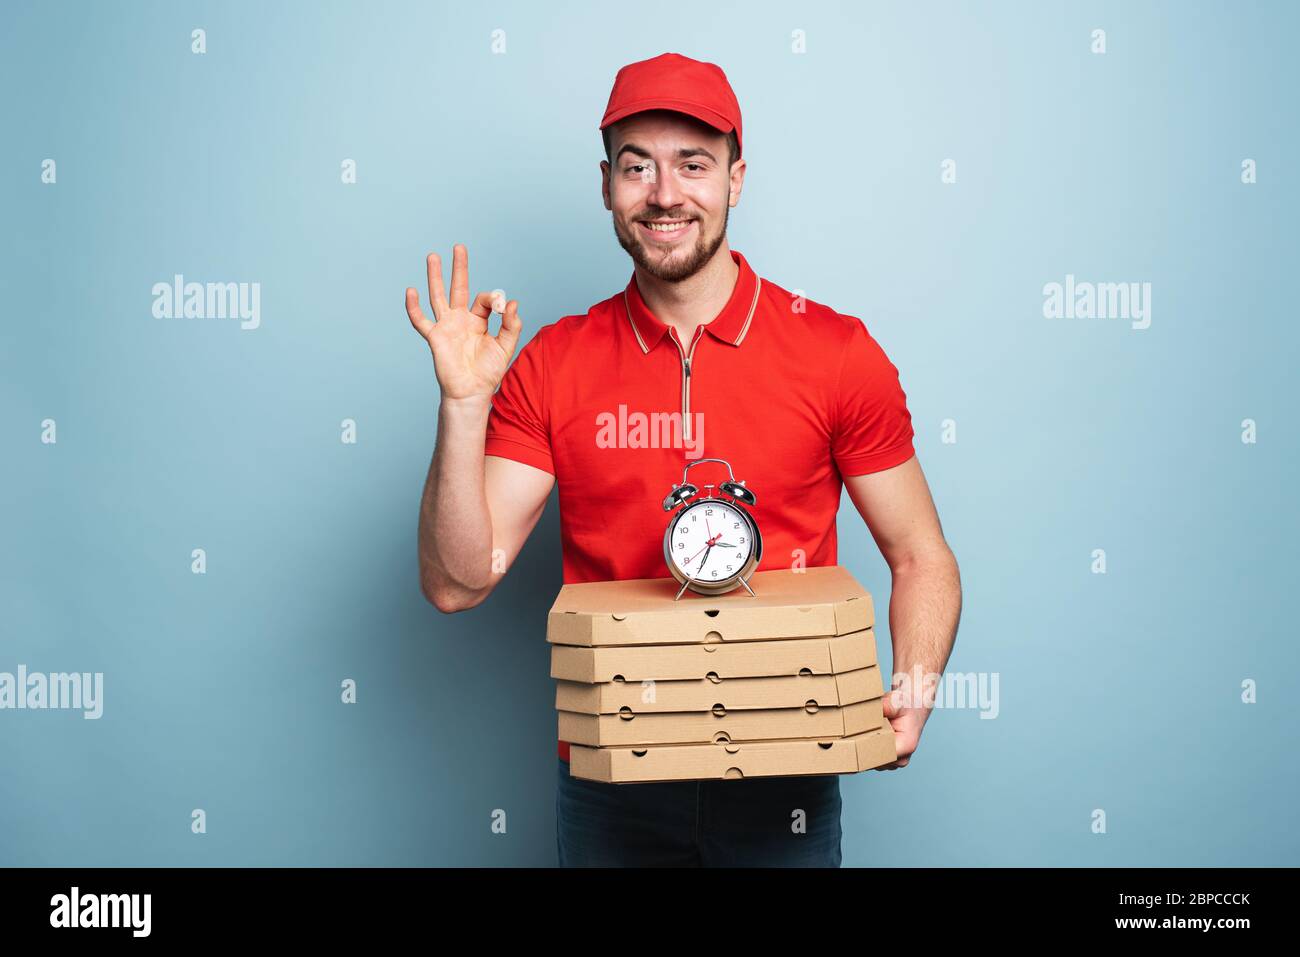 Courier is punctual to deliver quickly pizzas. Cyan background. Stock Photo